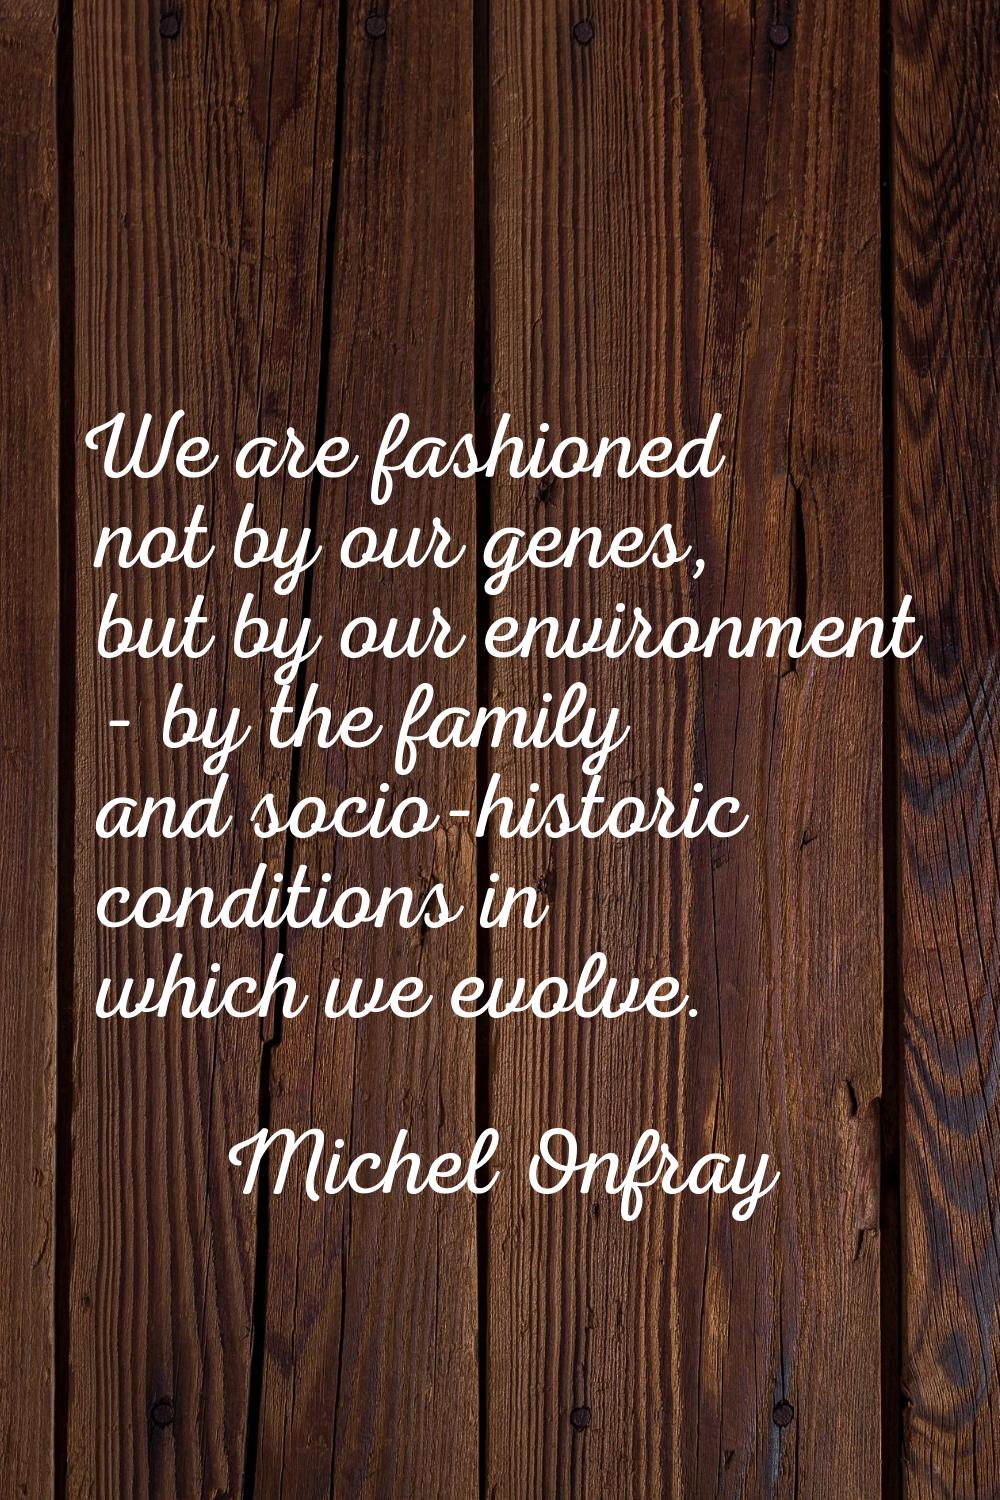 We are fashioned not by our genes, but by our environment - by the family and socio-historic condit